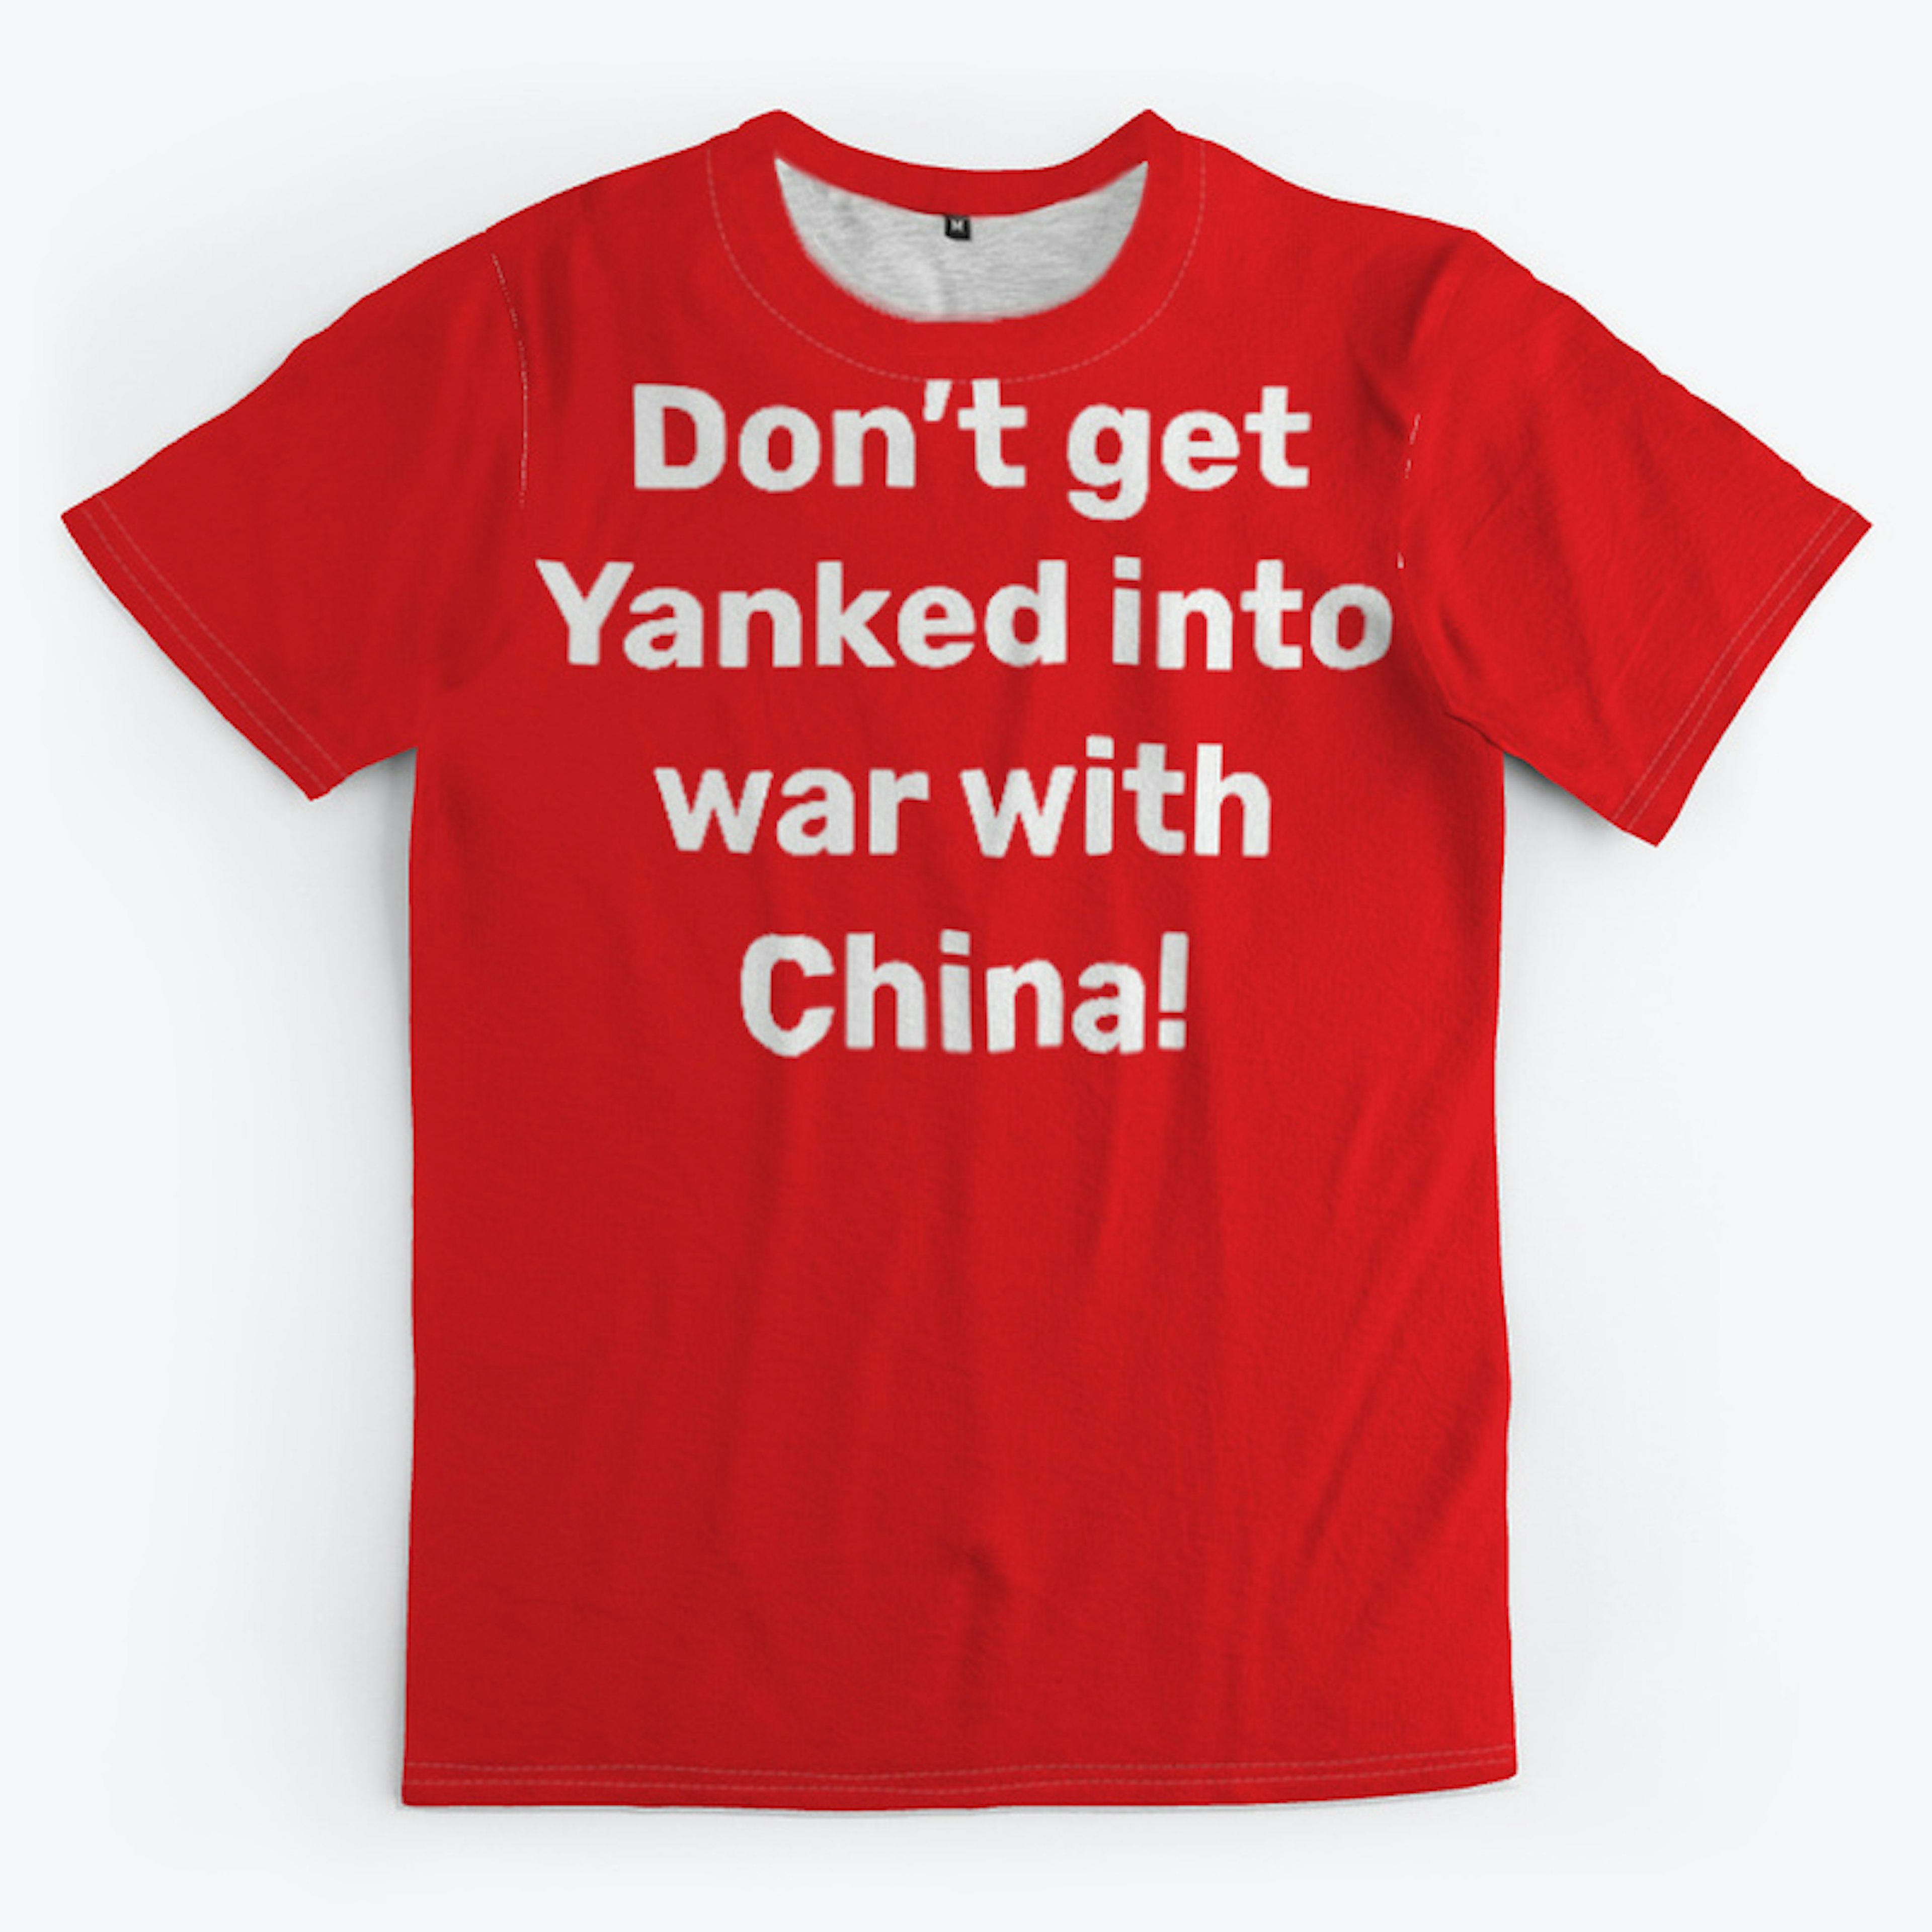 Don't Get Yanked into War With China!